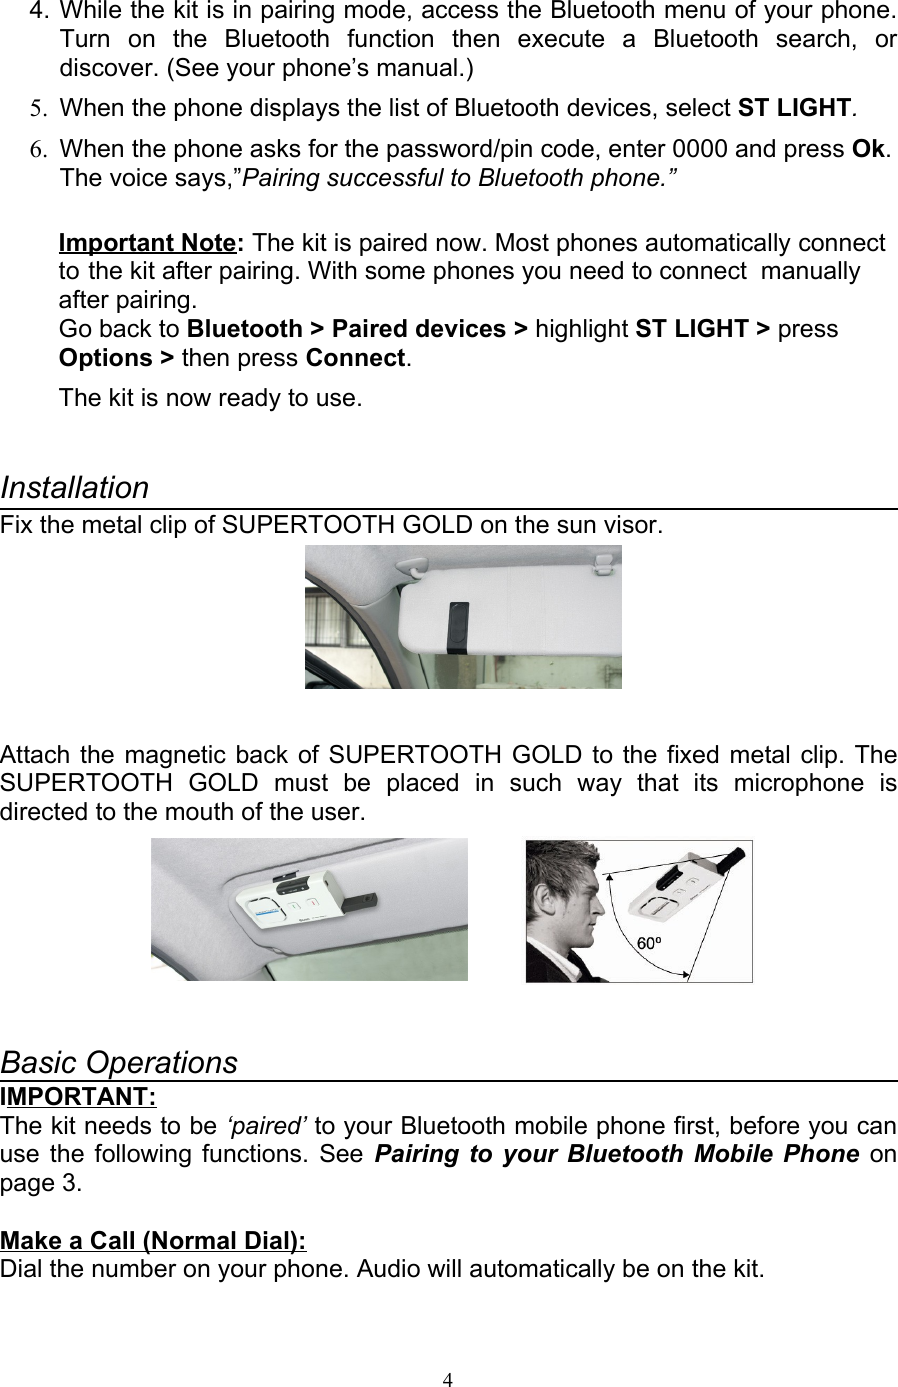 4. While the kit is in pairing mode, access the Bluetooth menu of your phone. Turn   on   the   Bluetooth   function   then   execute   a   Bluetooth   search,   or discover. (See your phone’s manual.)5. When the phone displays the list of Bluetooth devices, select ST LIGHT.6. When the phone asks for the password/pin code, enter 0000 and press Ok. The voice says,”Pairing successful to Bluetooth phone.”Important Note: The kit is paired now. Most phones automatically connect  to the kit after pairing. With some phones you need to connect  manually after pairing.Go back to Bluetooth &gt; Paired devices &gt; highlight ST LIGHT &gt; press Options &gt; then press Connect. The kit is now ready to use.InstallationFix the metal clip of SUPERTOOTH GOLD on the sun visor.Attach the magnetic back of SUPERTOOTH GOLD to the fixed metal clip. The SUPERTOOTH   GOLD  must   be   placed   in   such   way   that   its   microphone   is directed to the mouth of the user.         Basic OperationsIMPORTANT:The kit needs to be ‘paired’ to your Bluetooth mobile phone first, before you can use the following functions. See  Pairing to your Bluetooth Mobile Phone  on page 3.Make a Call (Normal Dial): Dial the number on your phone. Audio will automatically be on the kit.4